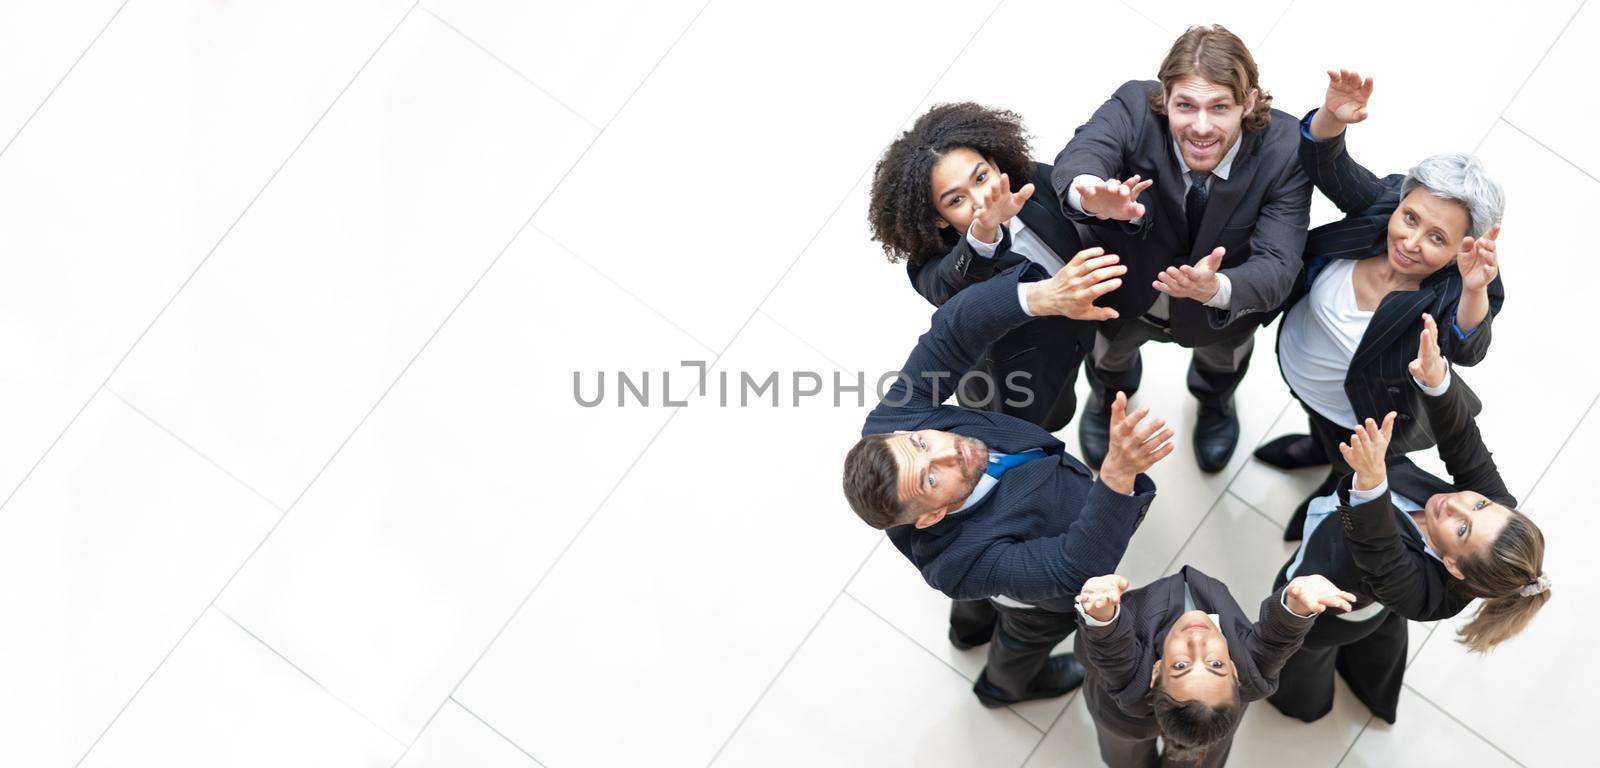 Top view of business people with their hands together in a circle with high-five